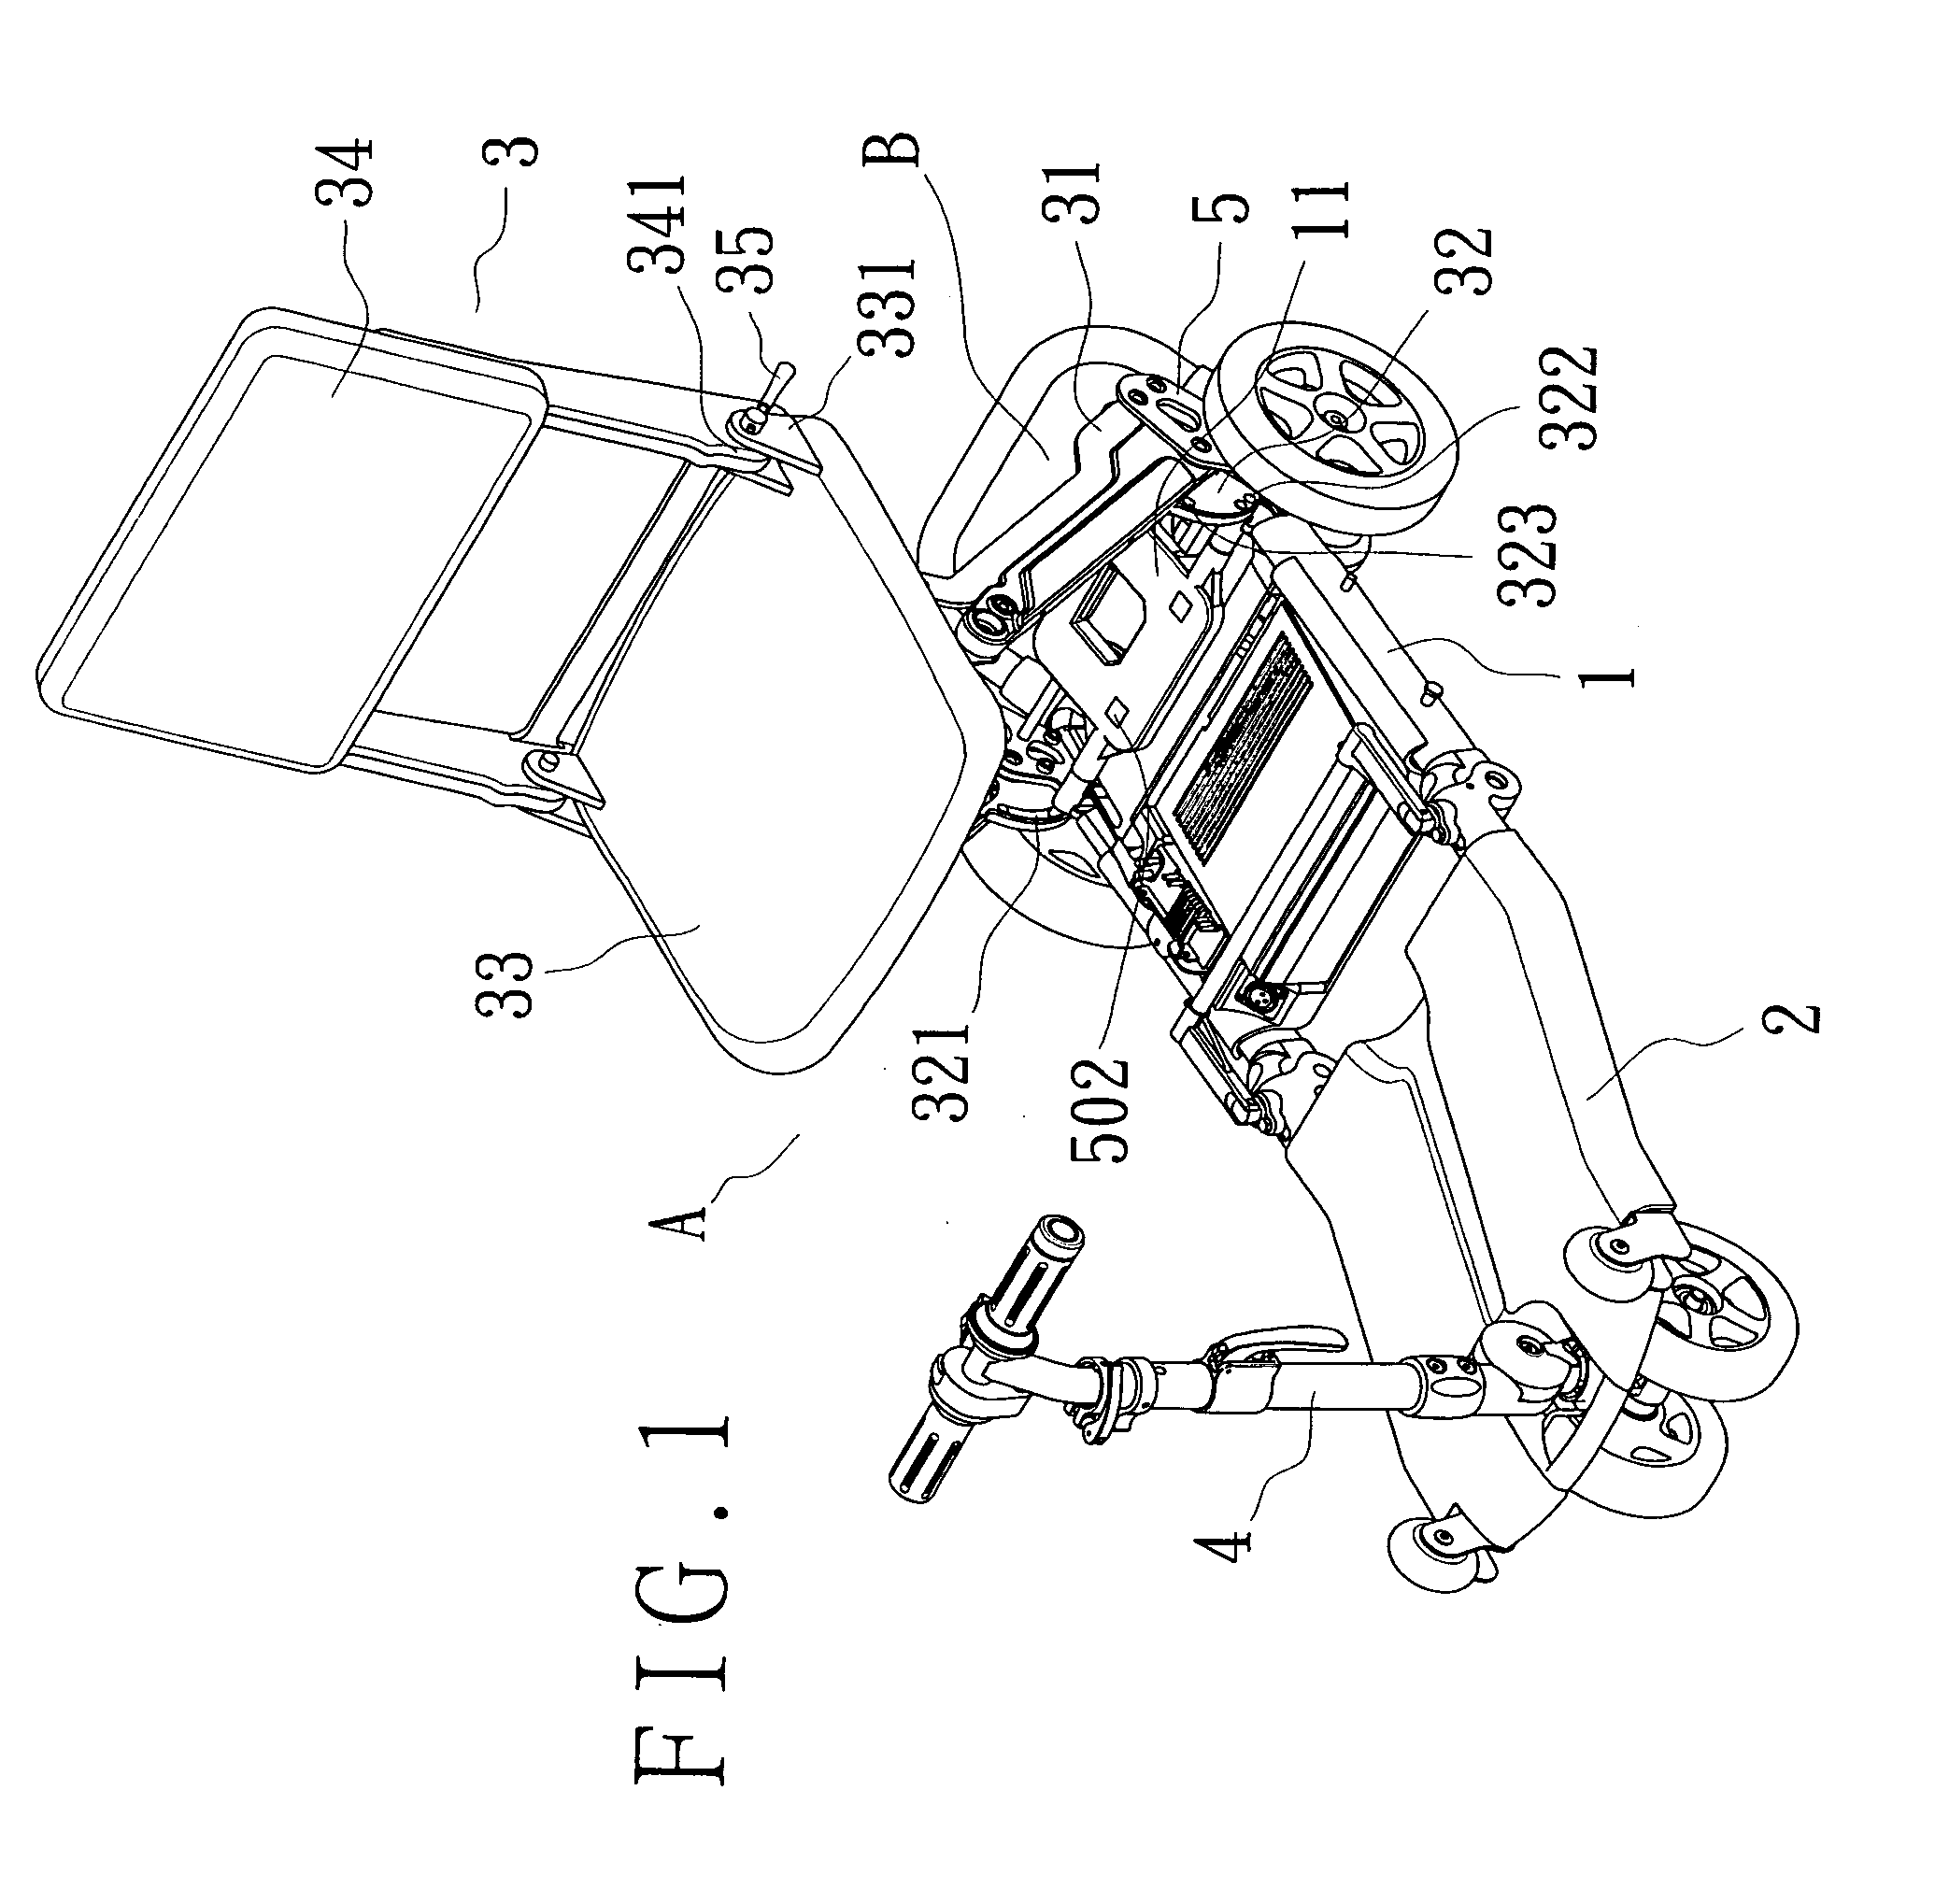 Folding and fixing device for a seat of an electric walk-substituting vehicle